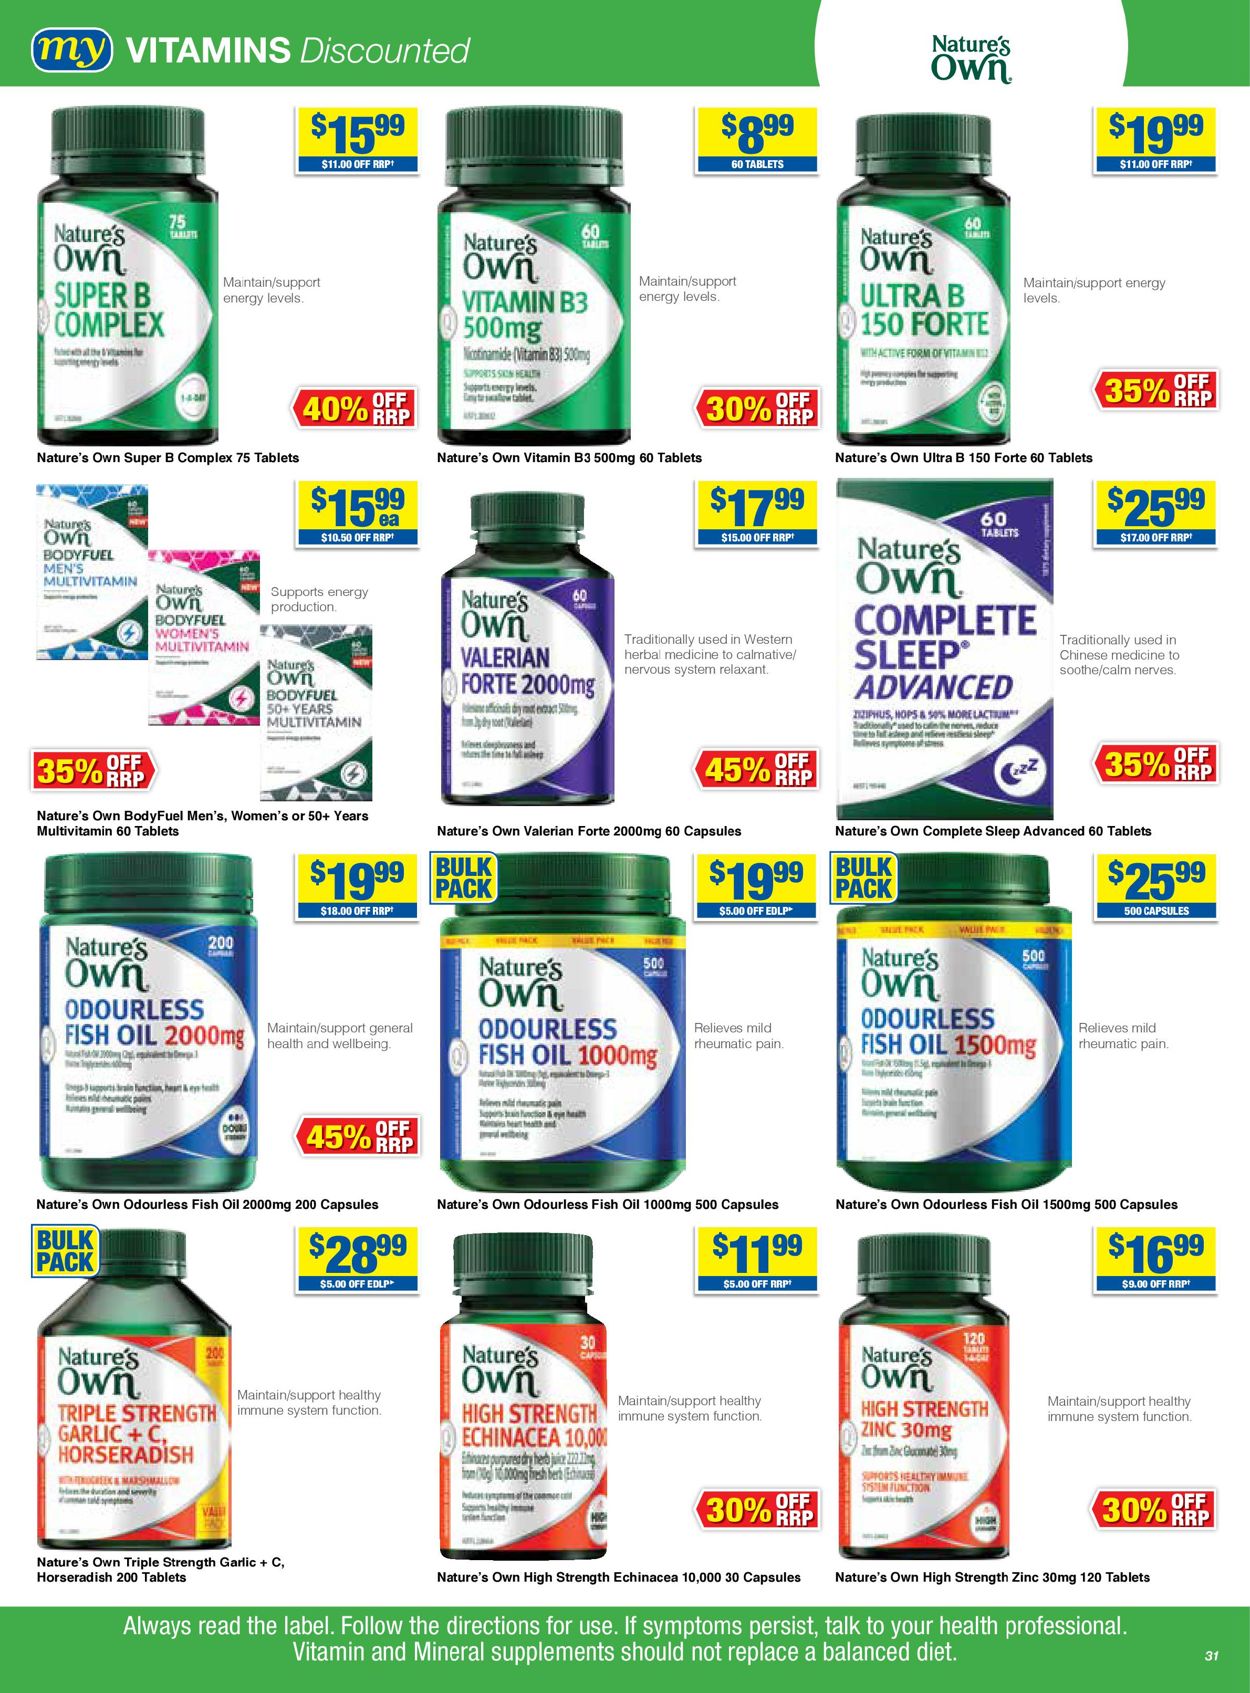 My Chemist Catalogue from 22/04/2021